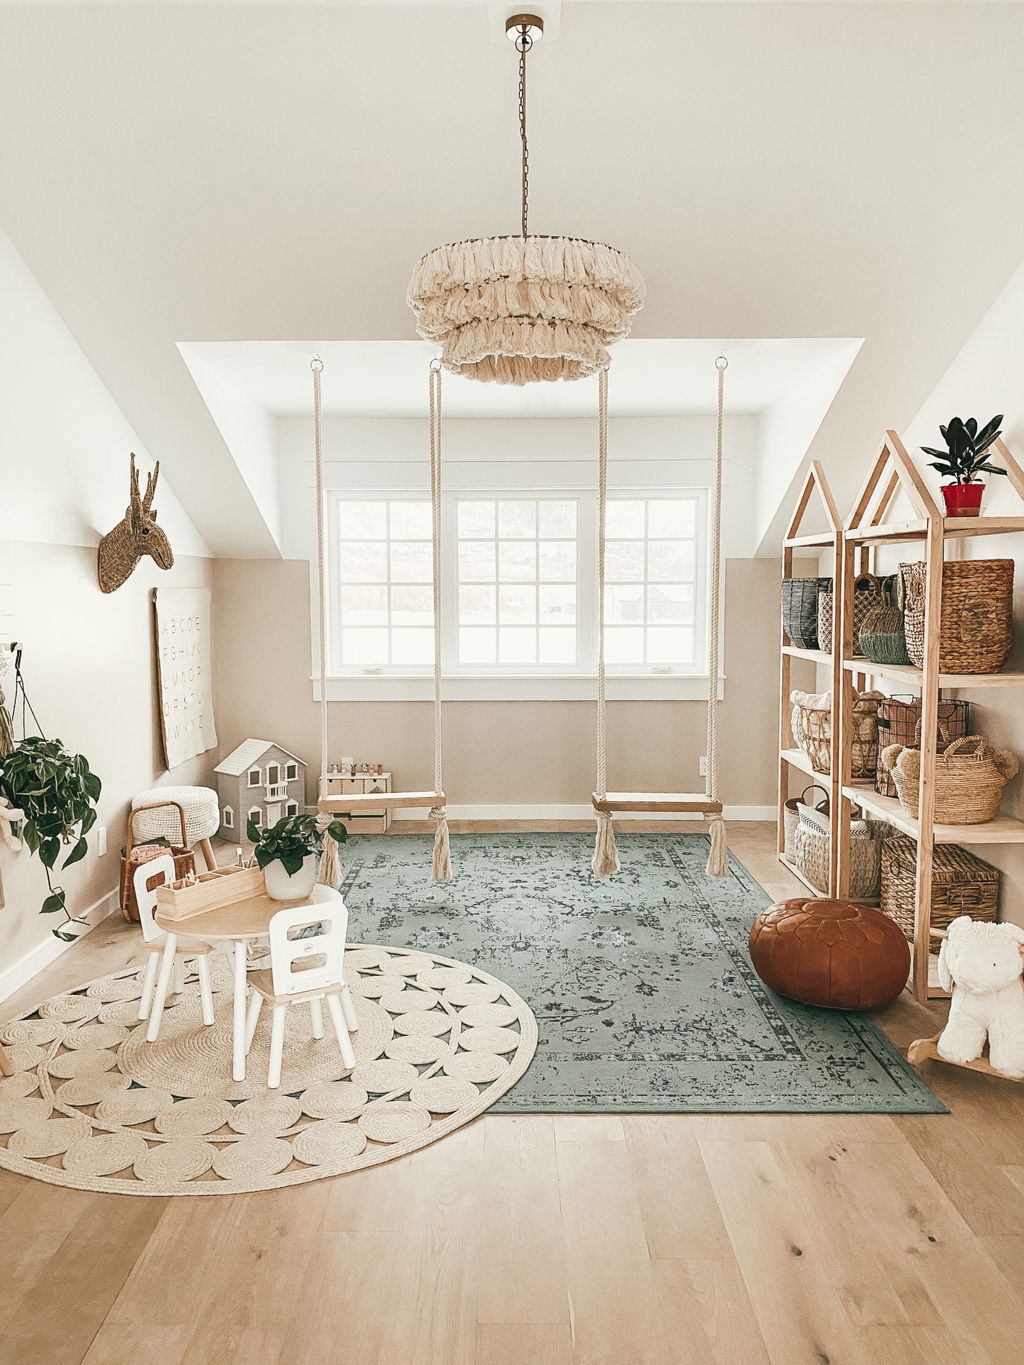 Kids playroom with storage for toys and small table with chairs